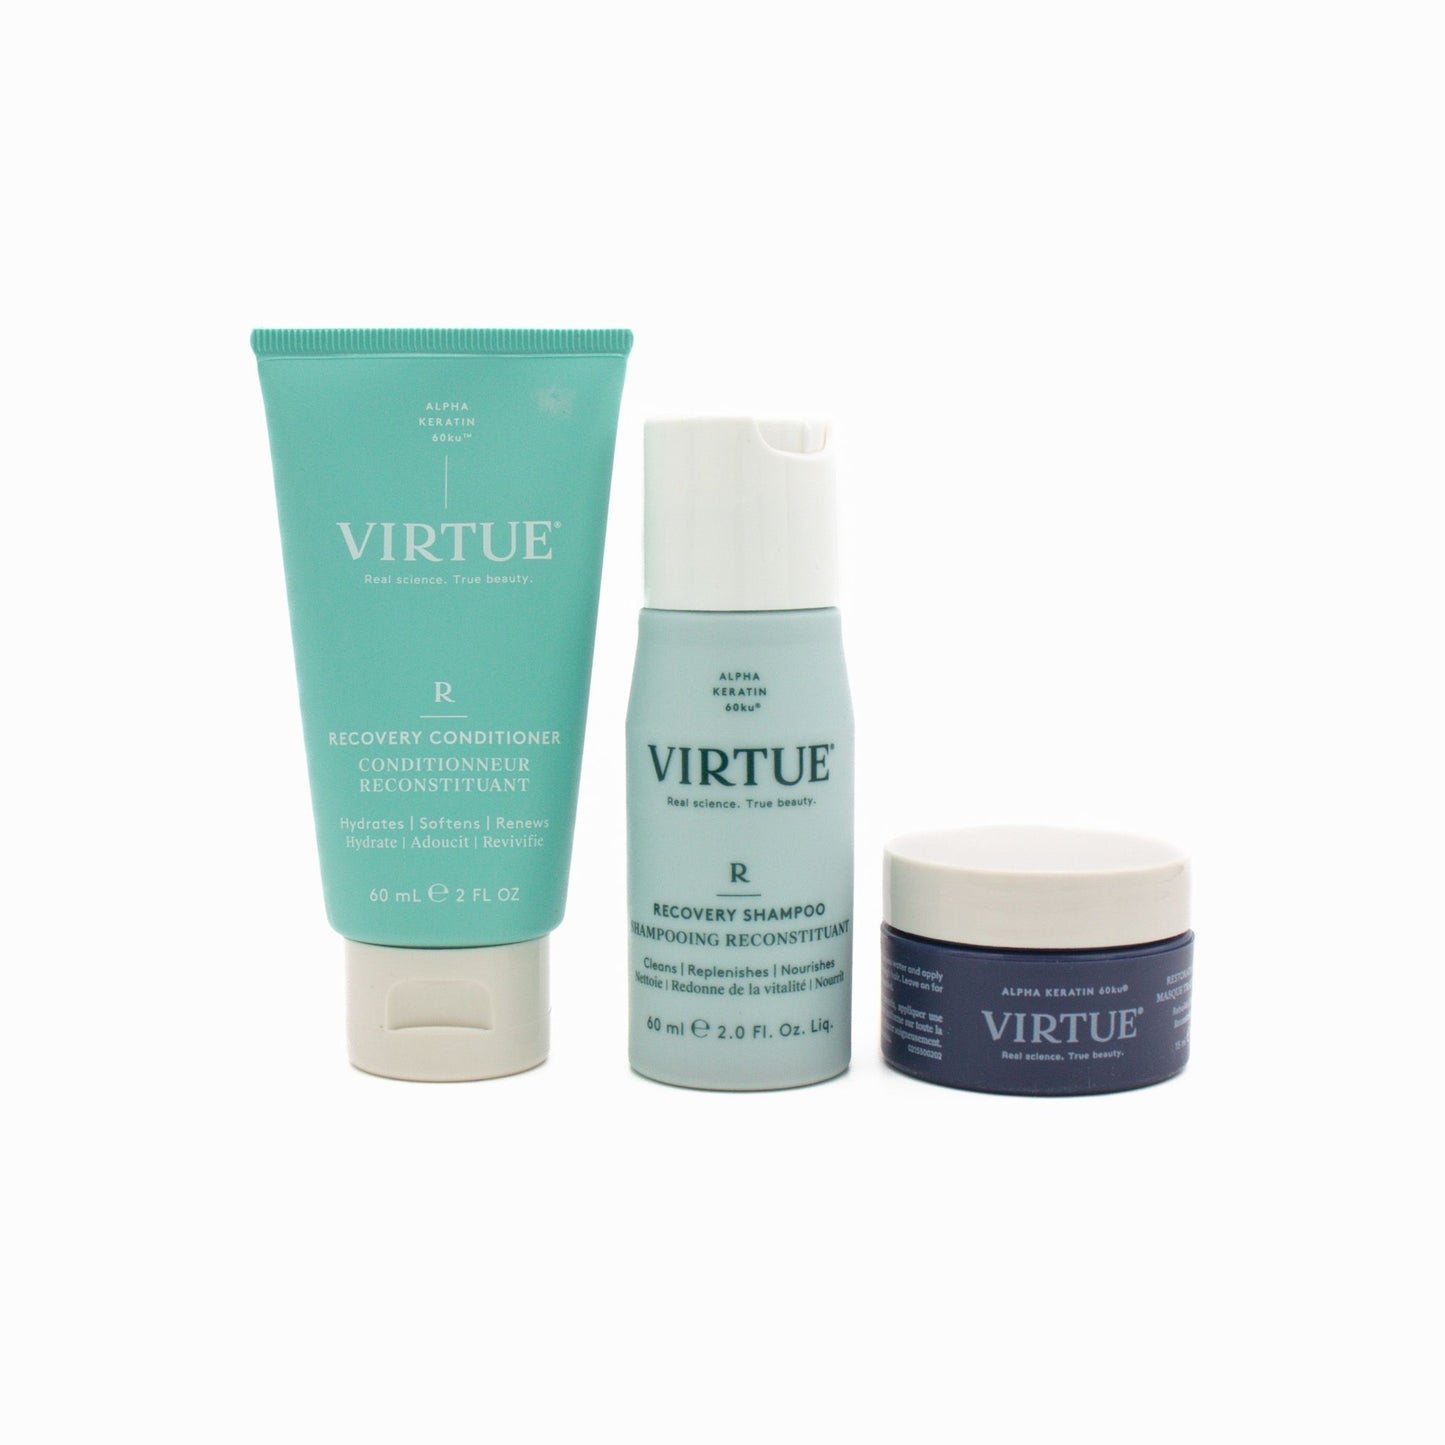 VIRTUE Recovery Repair & Stregthen Discovery Kit - Imperfect Box